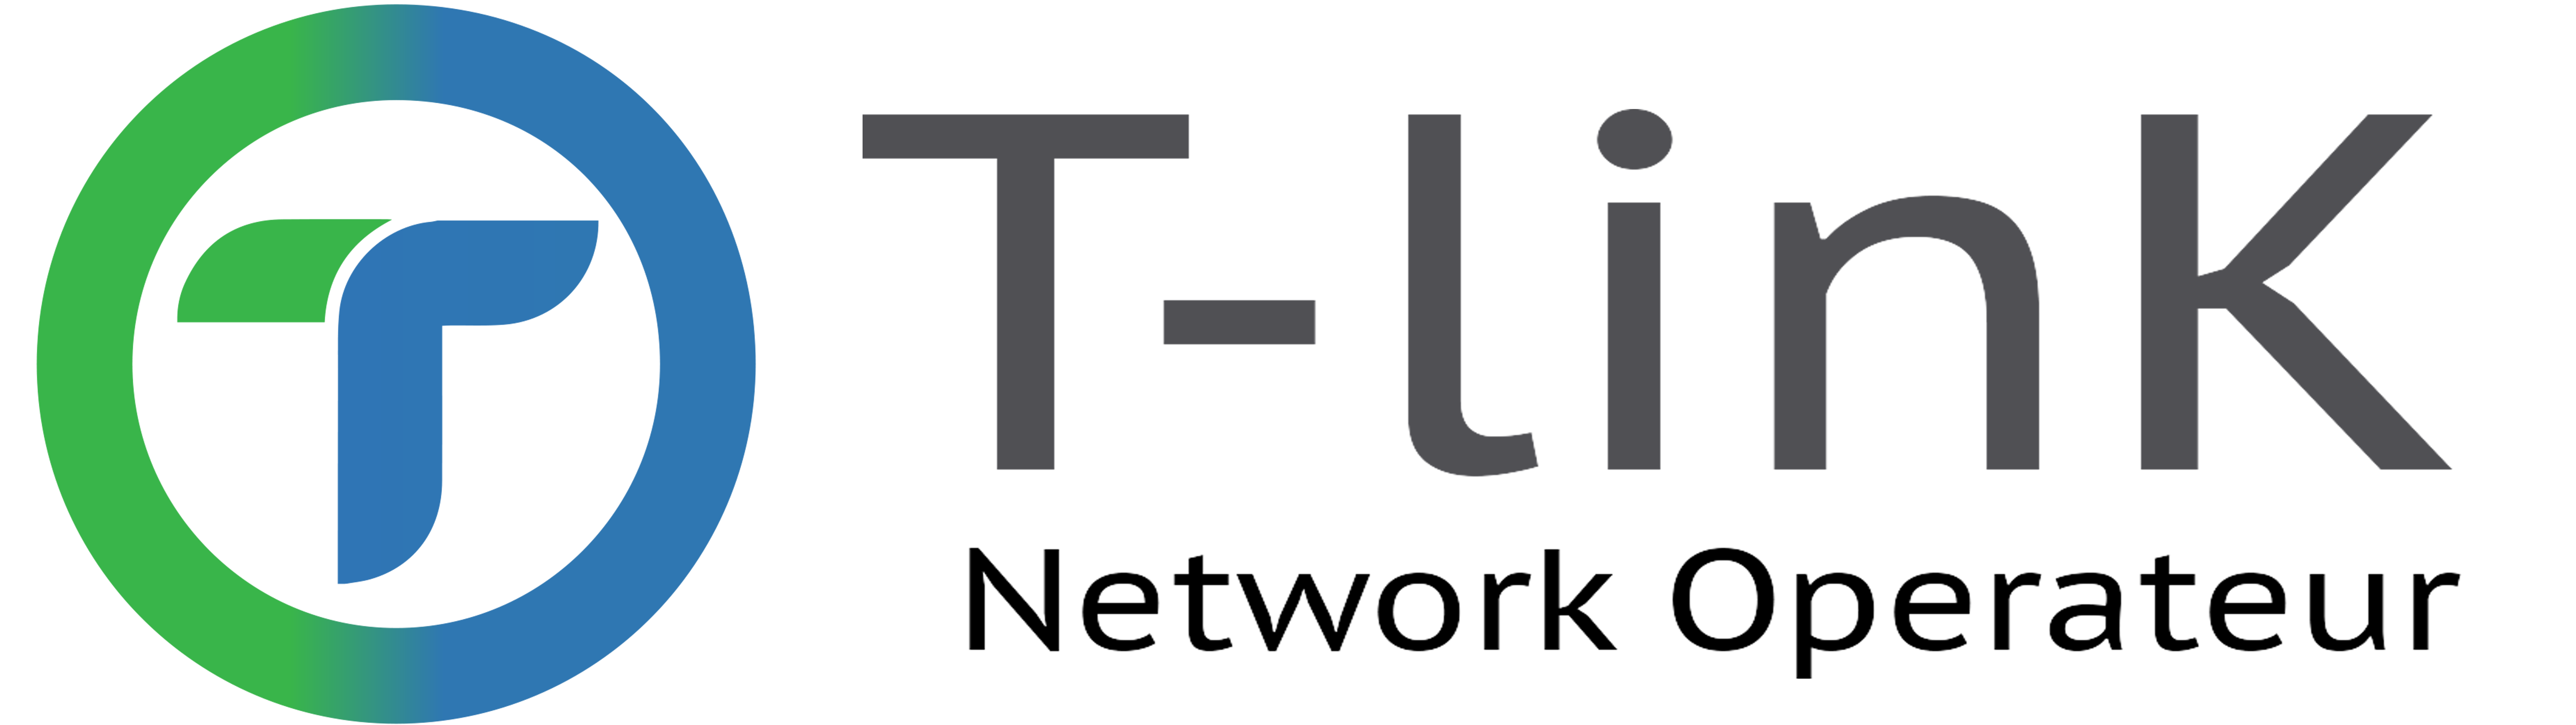 T-link Network Operateur